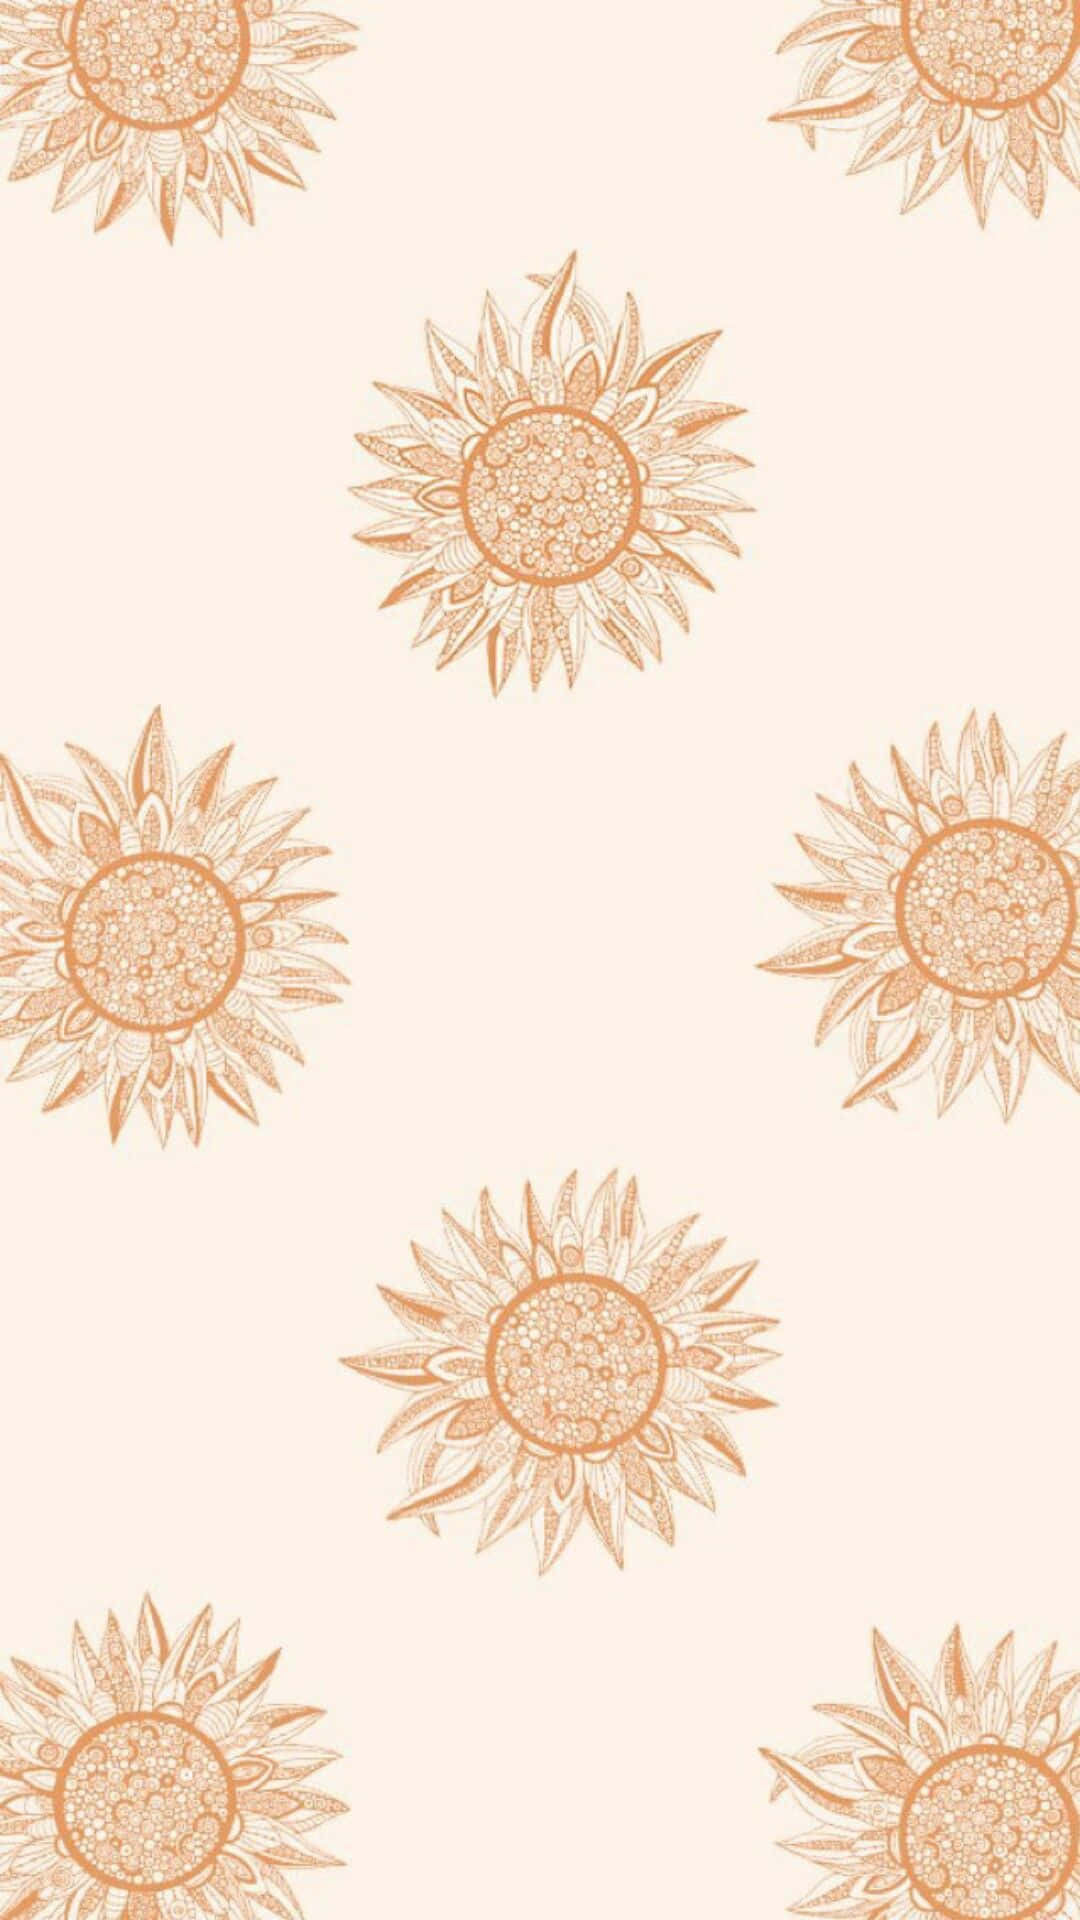 A Pattern Of Sunflowers On A Beige Background Wallpaper